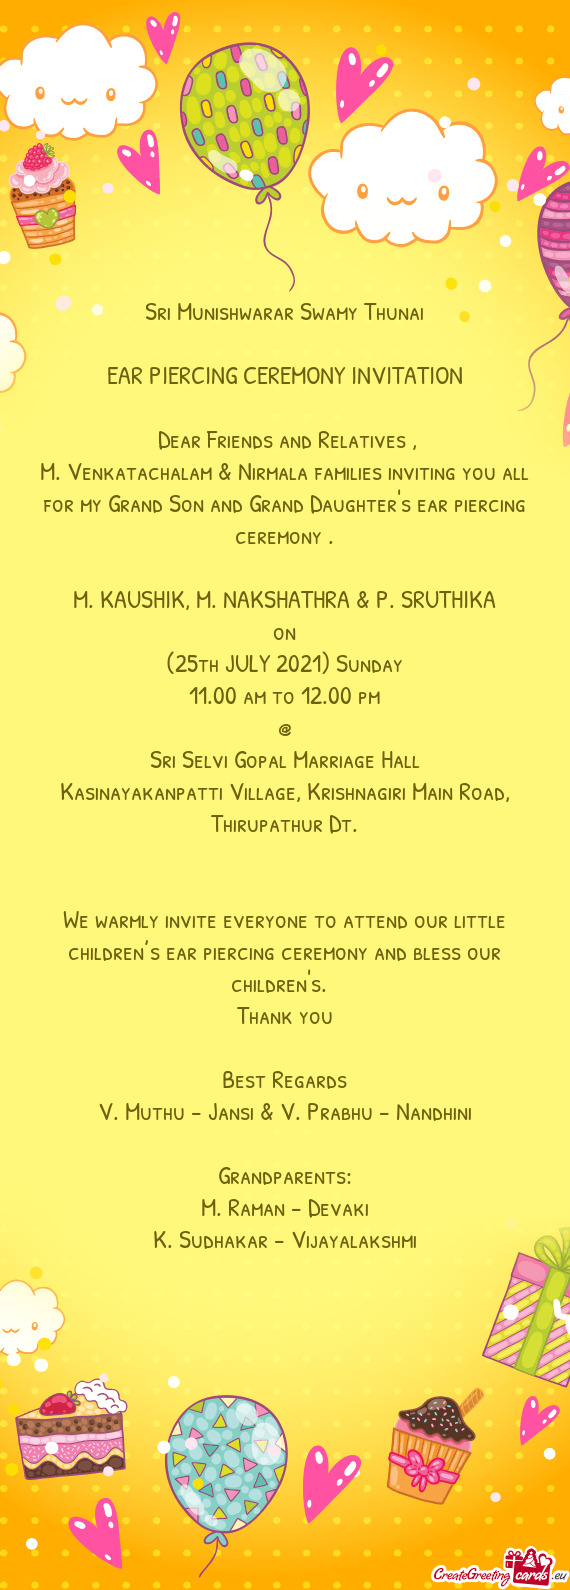 M. Venkatachalam & Nirmala families inviting you all for my Grand Son and Grand Daughter